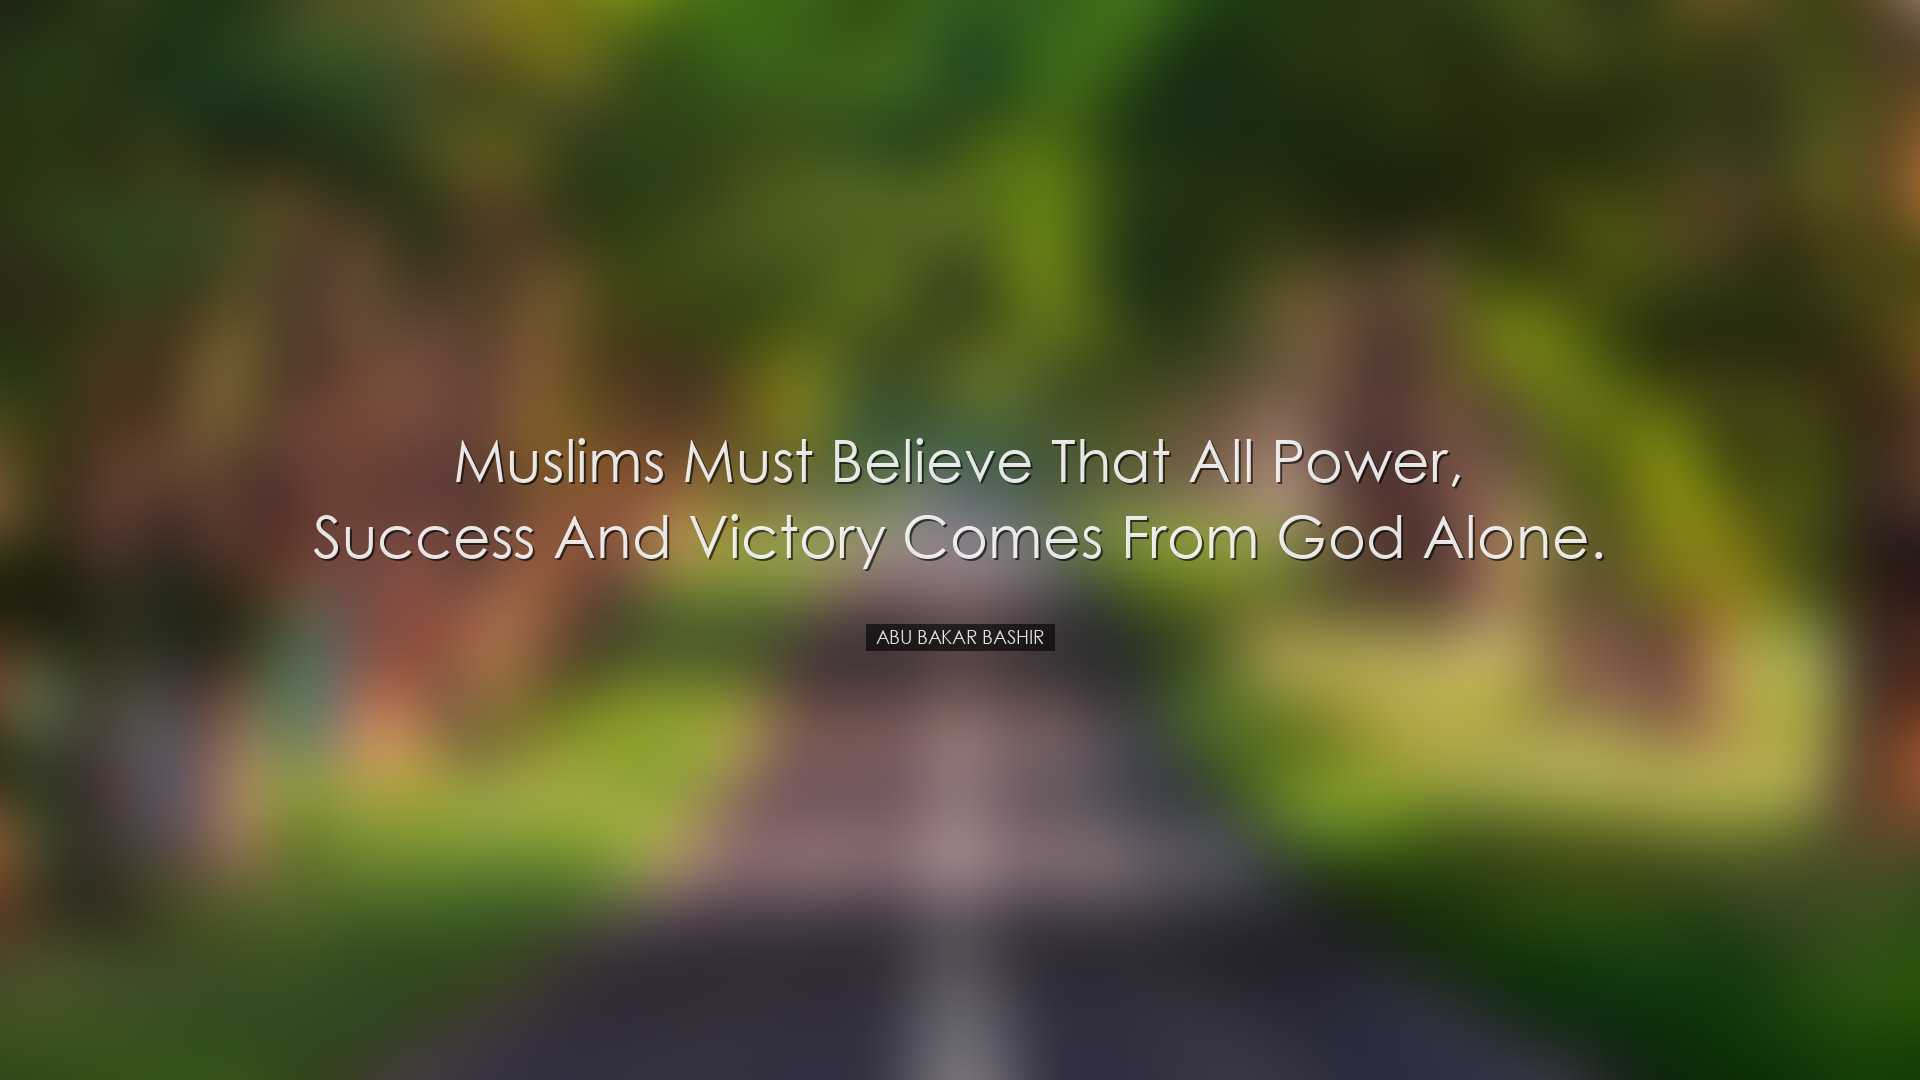 Muslims must believe that all power, success and victory comes fro